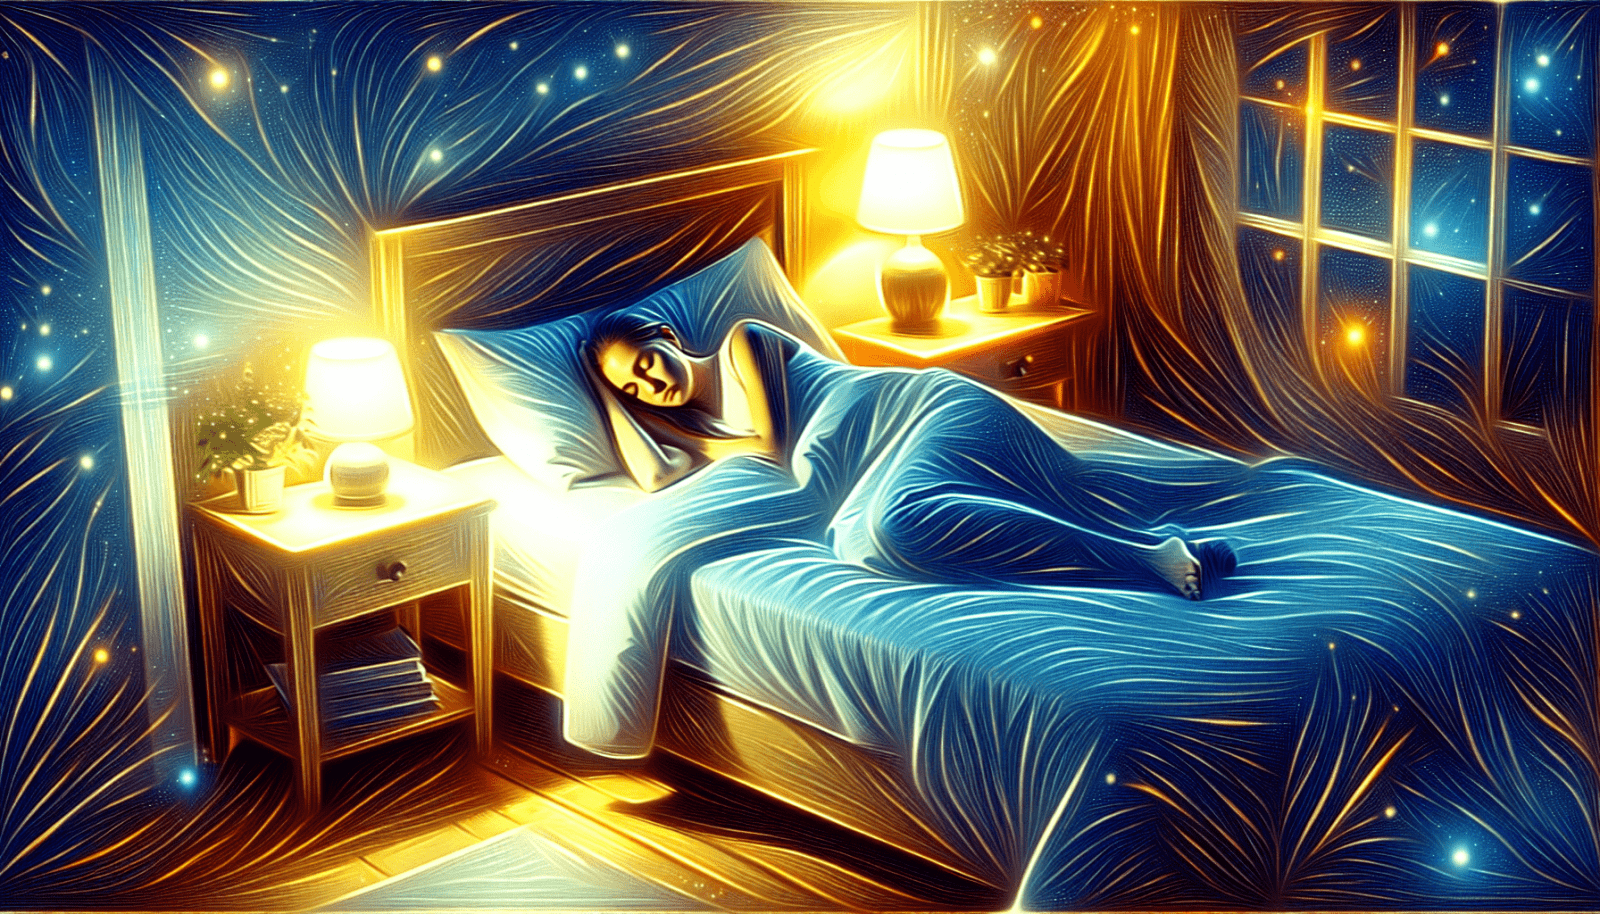 A digital art illustration depicting a woman asleep in a bed with blue covers, in a room lit by a bedside lamp, with the window showing a starry night sky, all in a swirling, Van Gogh-inspired style.